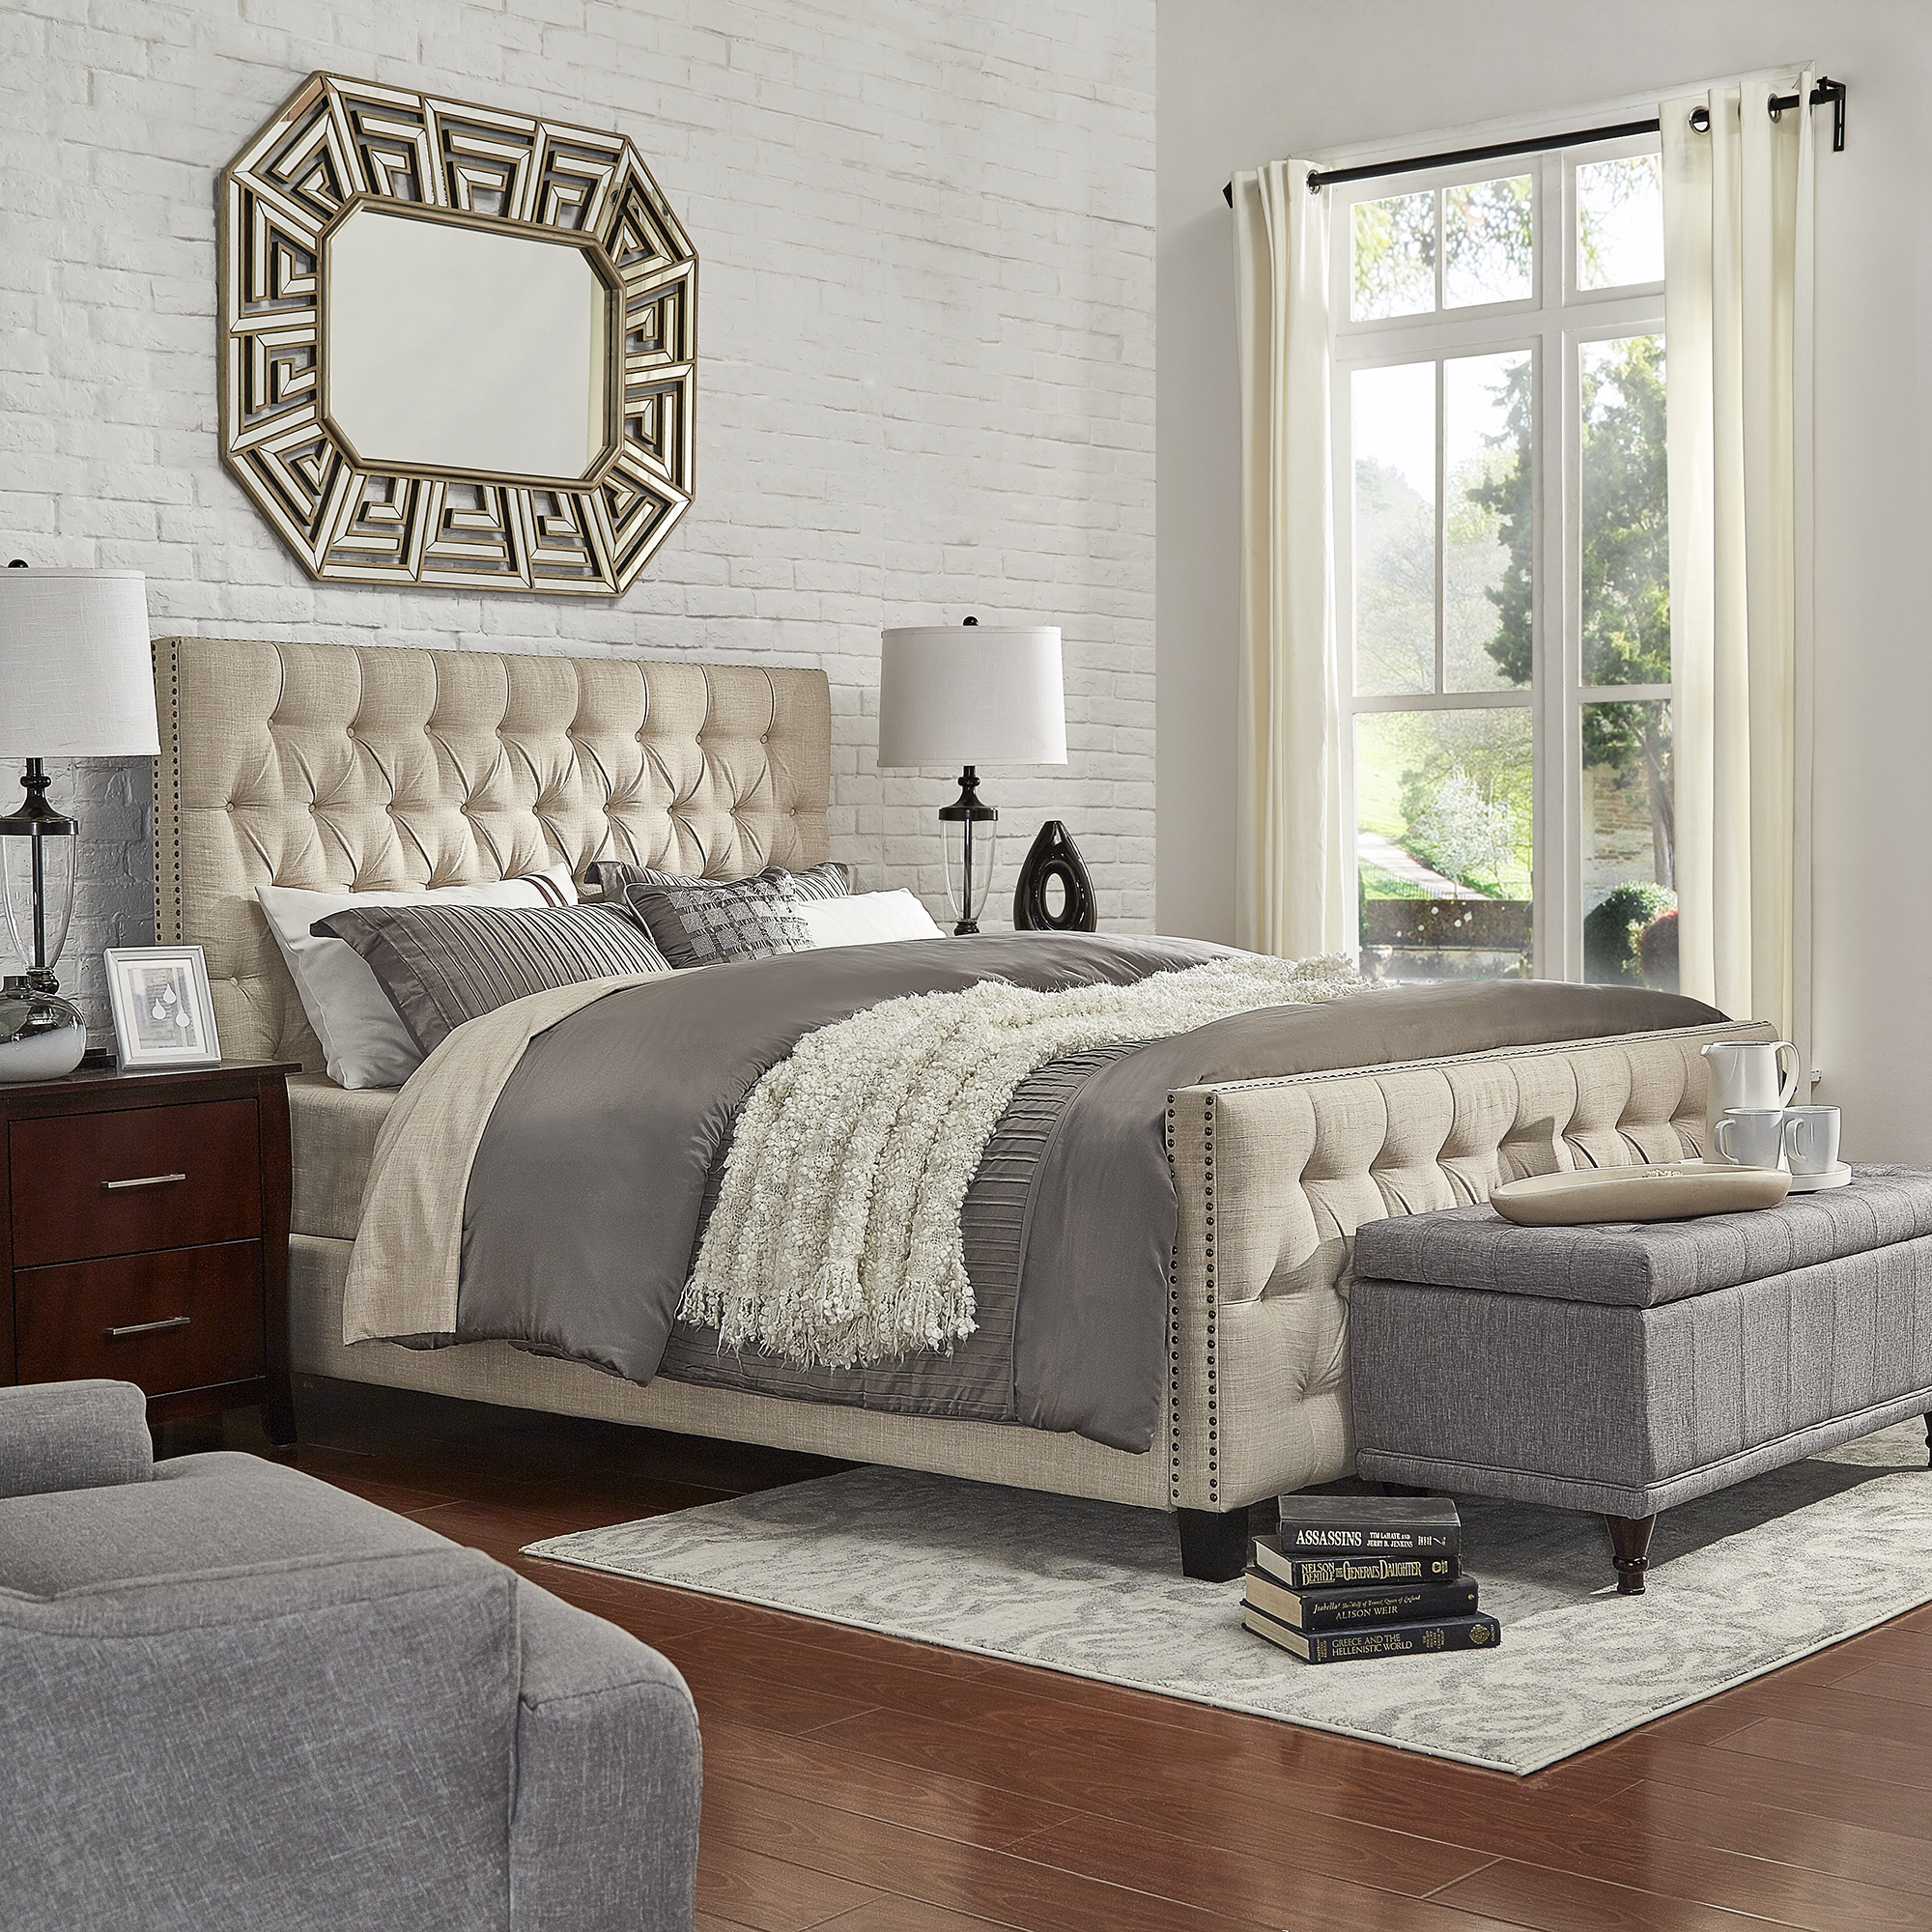 Tufted Nailhead Chesterfield Bed with Footboard